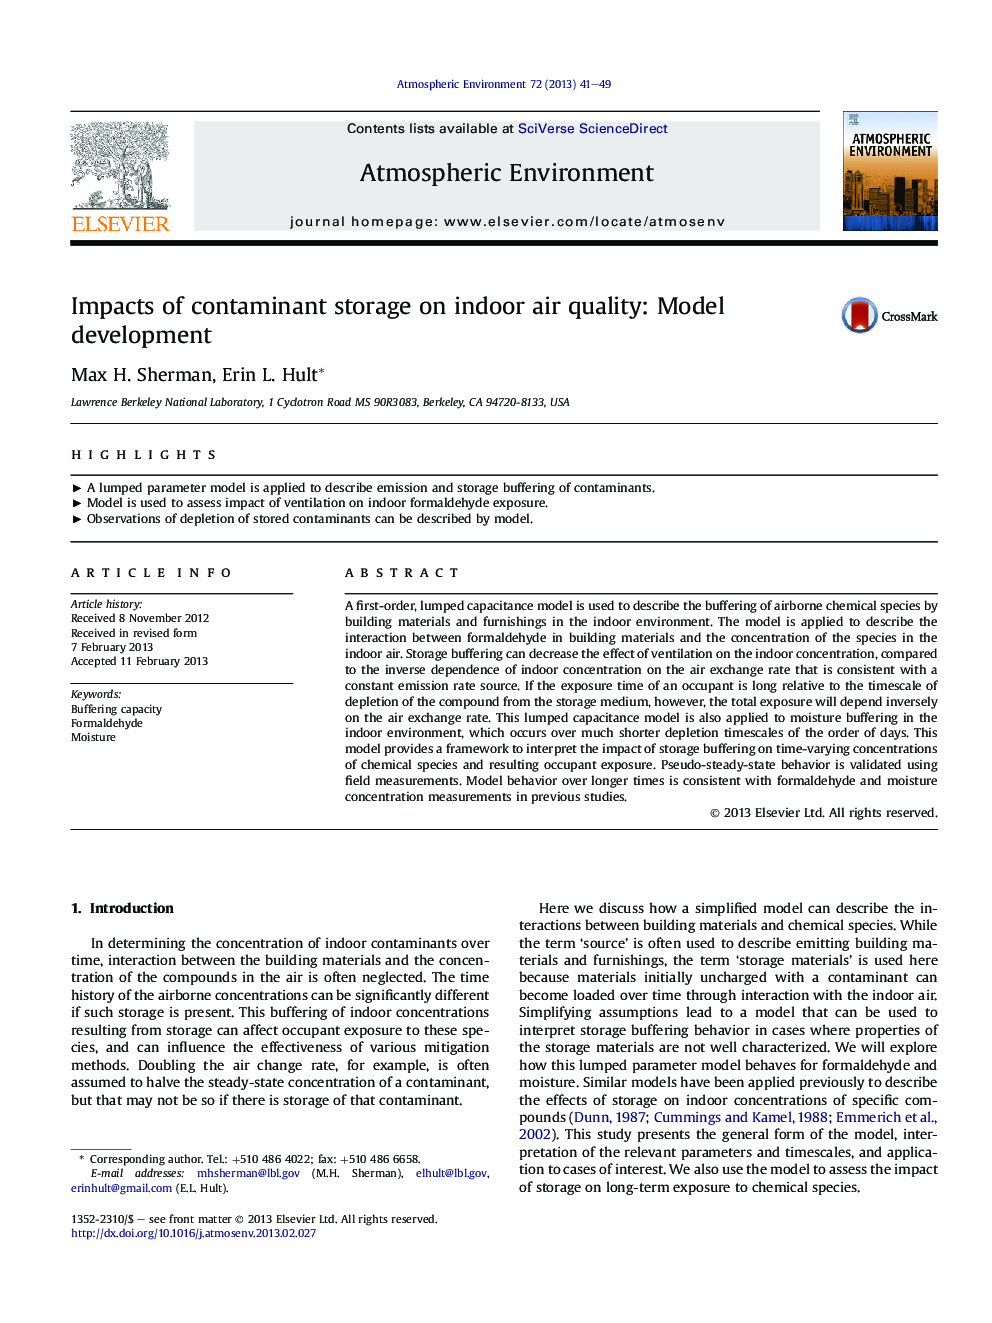 Impacts of contaminant storage on indoor air quality: Model development